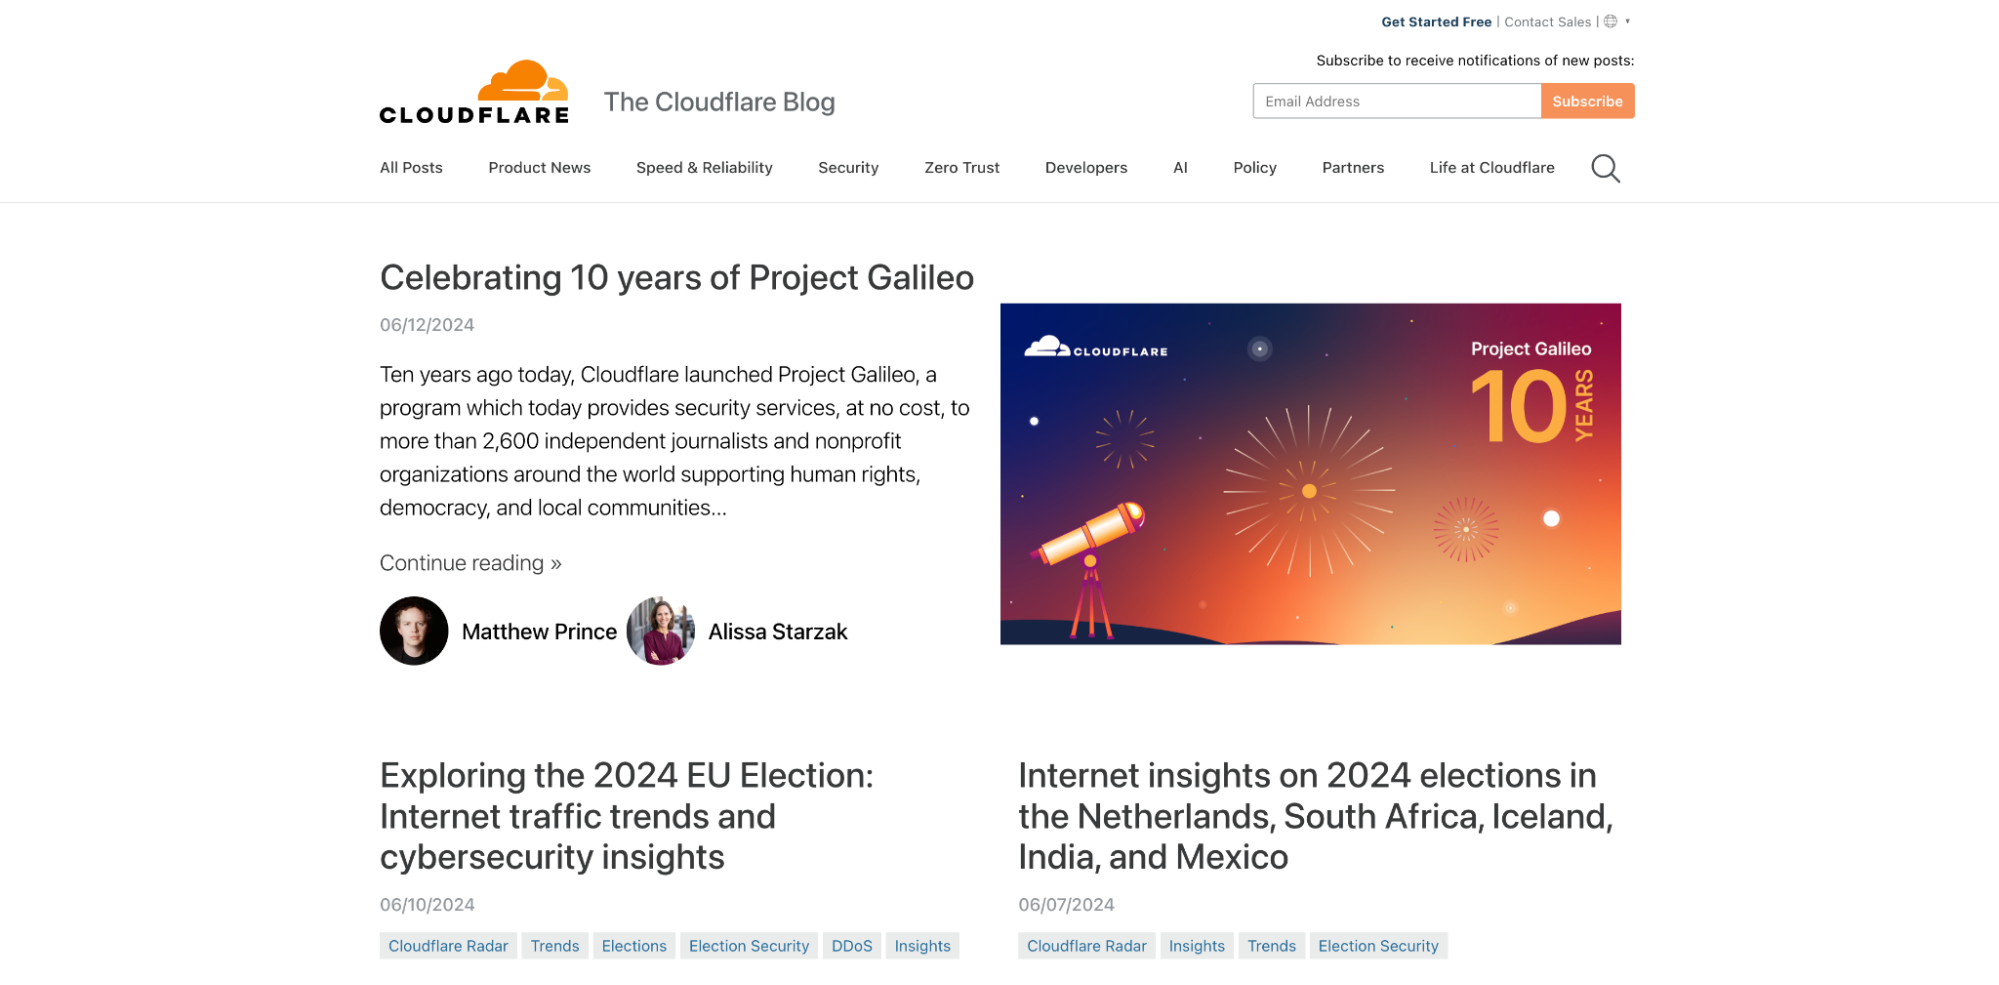 The Cloudflare Blog